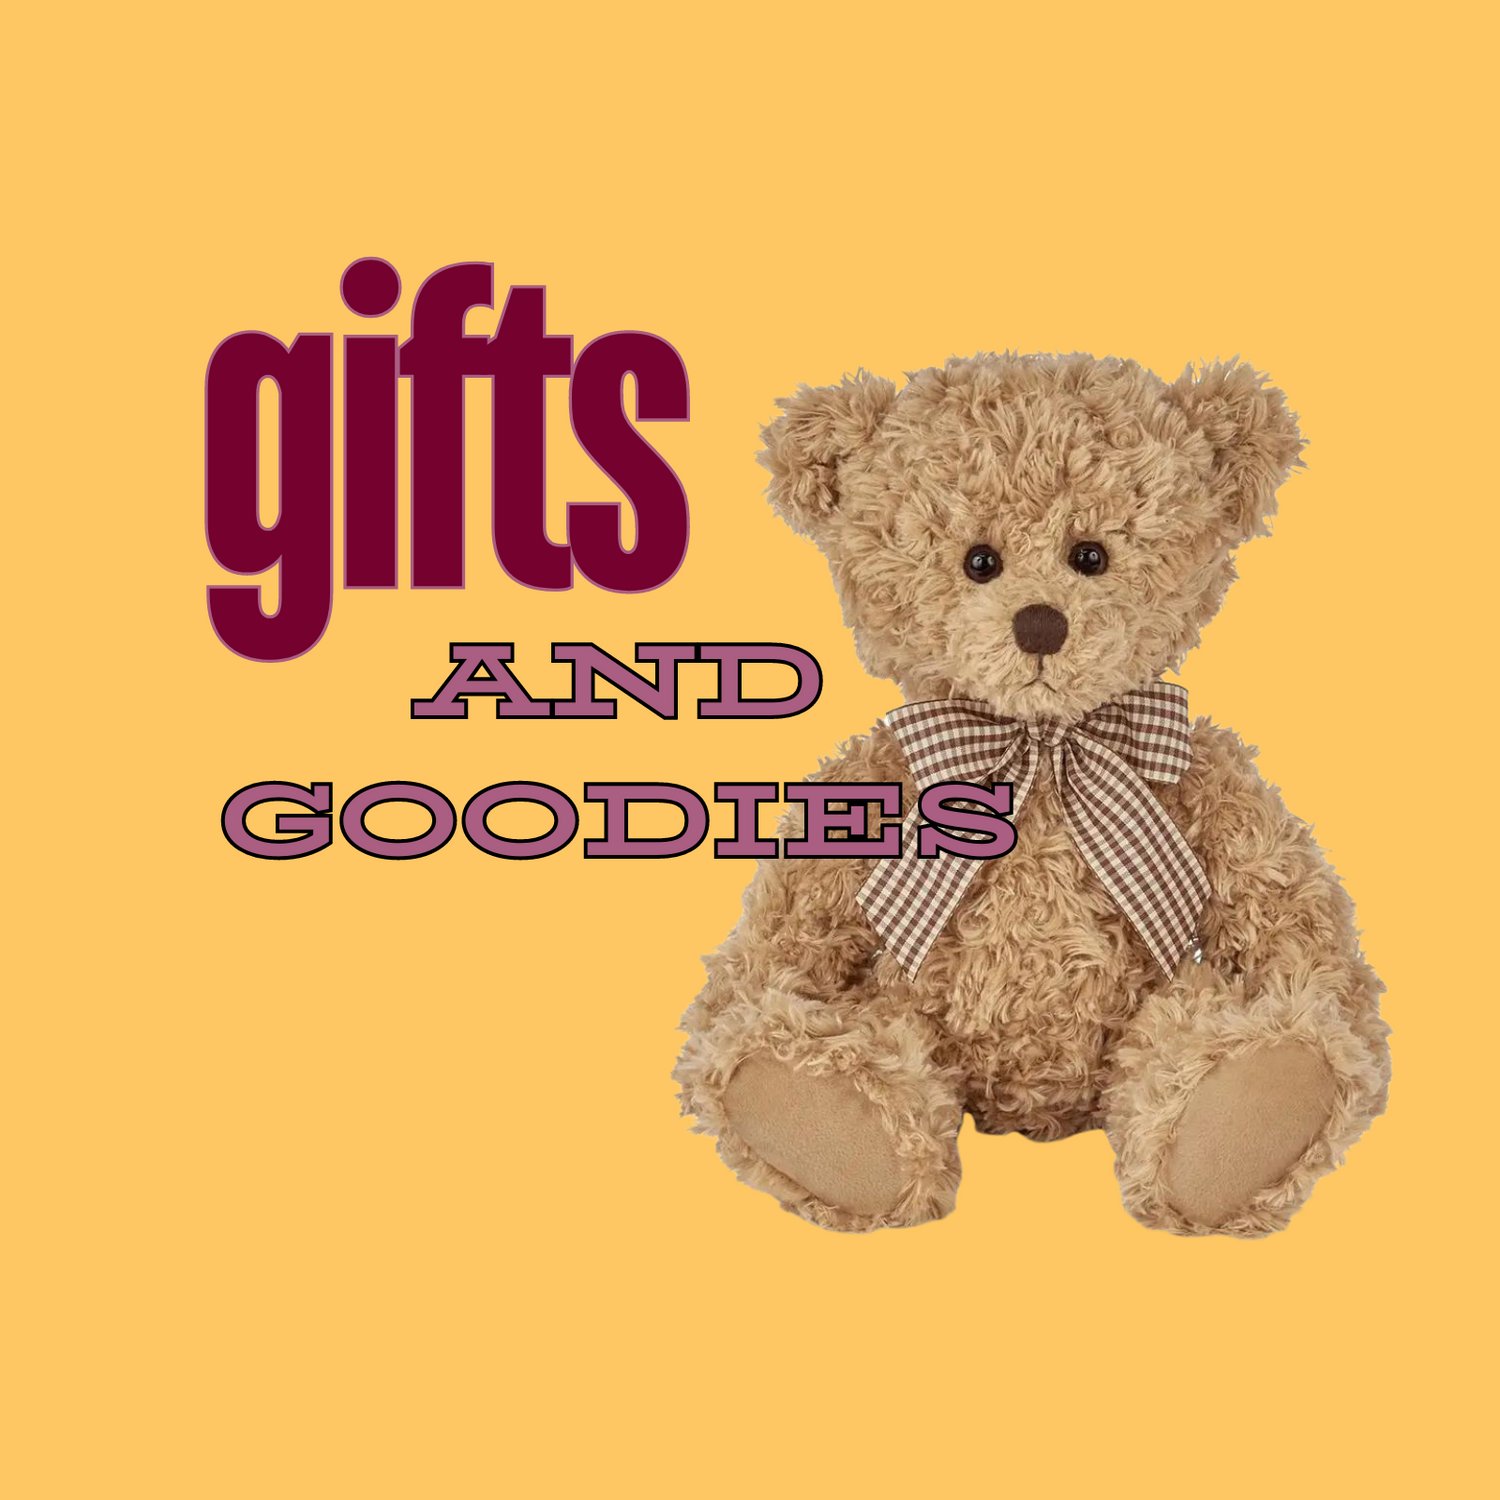 A banner for Bud Weismiller's gifts and goodies section.  It featurs a cuddly teddy bear named Theodore.